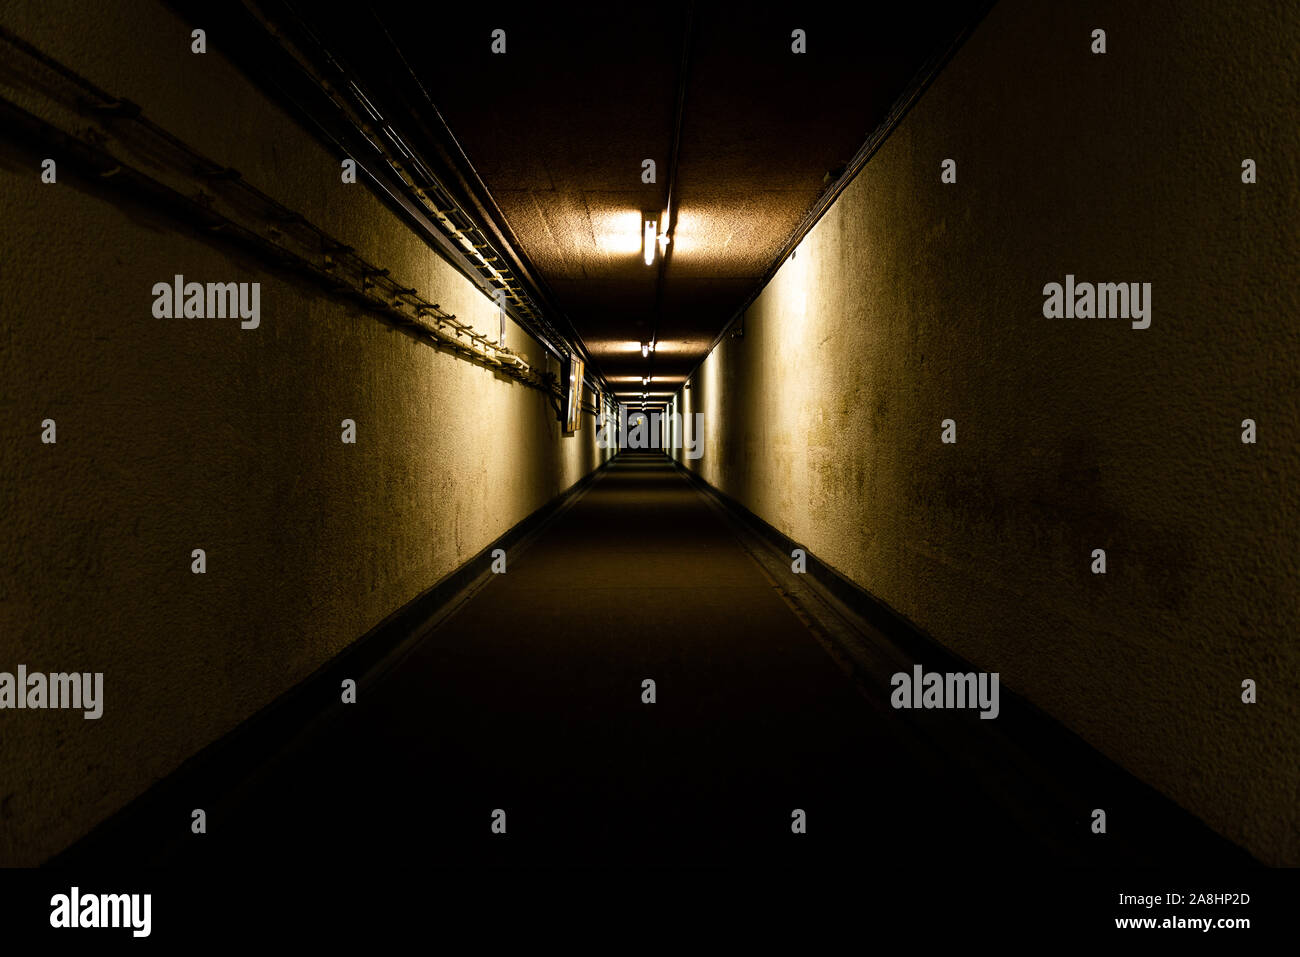 Entrance to the Kelvedon hatch nuclear bunker in Braintree, Essex, a long interior tunnel, spooky and scary in design Stock Photo